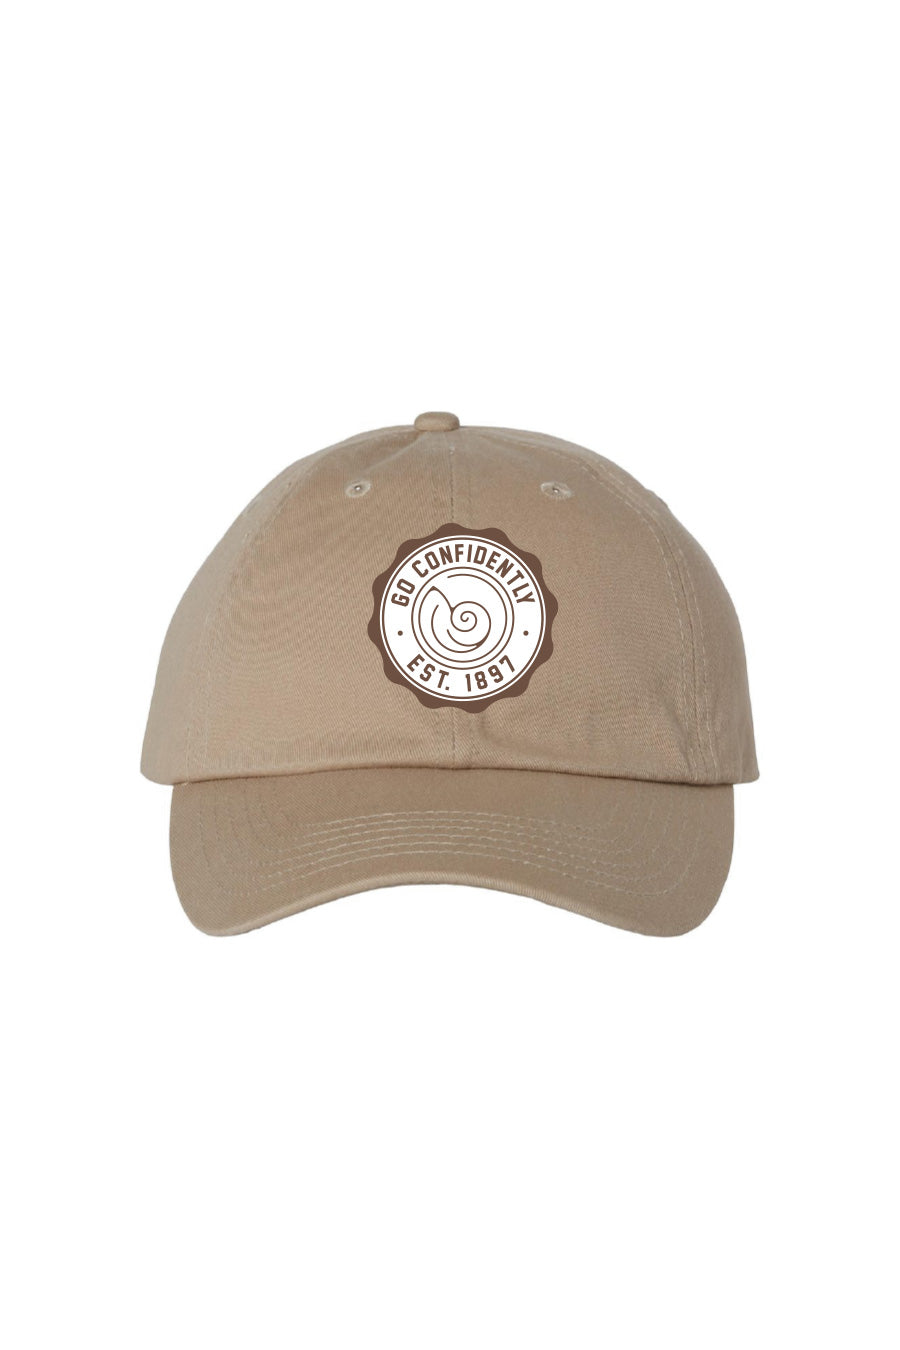 Go Confidently Patch Hat